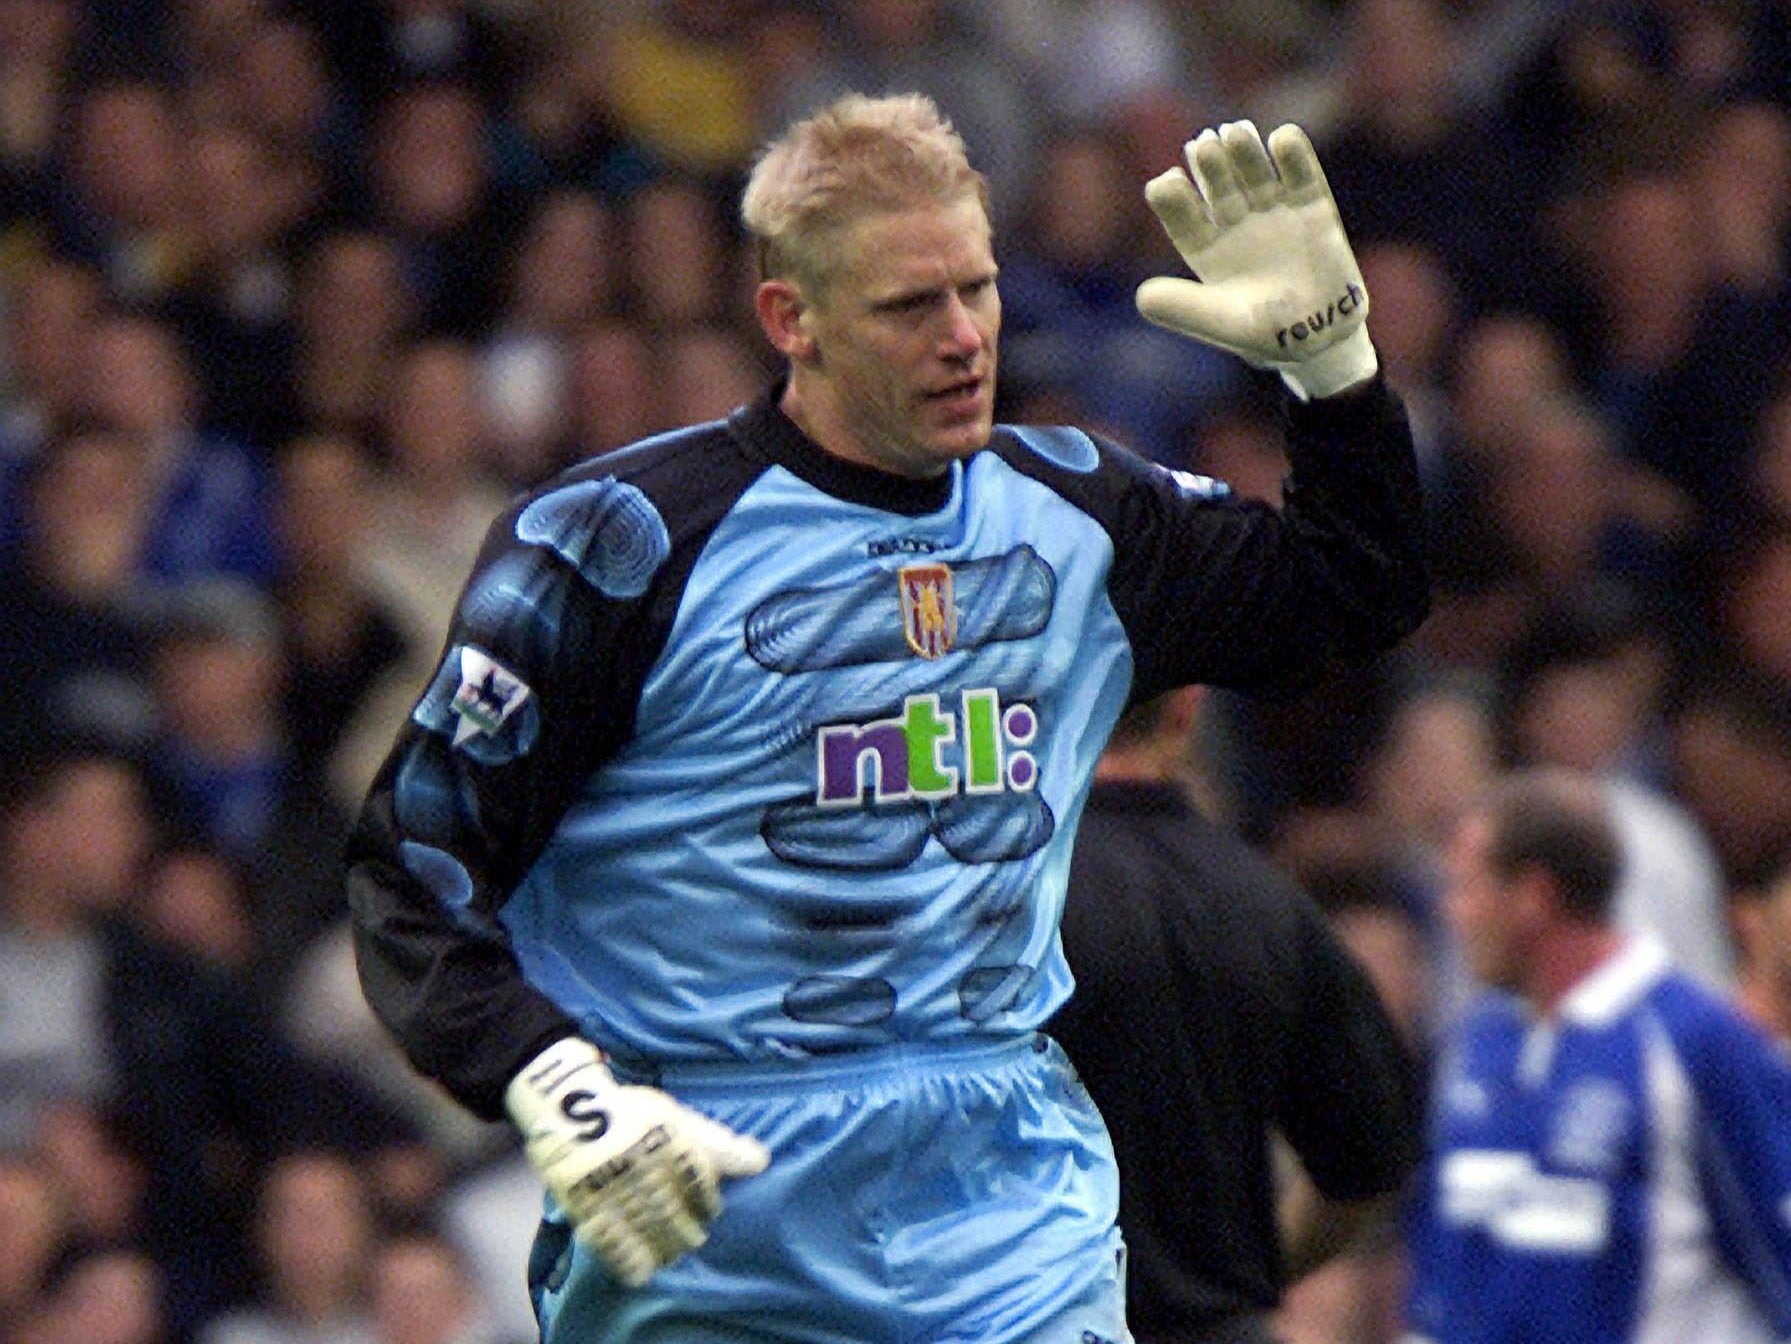 Peter Schmeichel reacts after scoring for Aston Villa against Everton (David Kendall/PA)